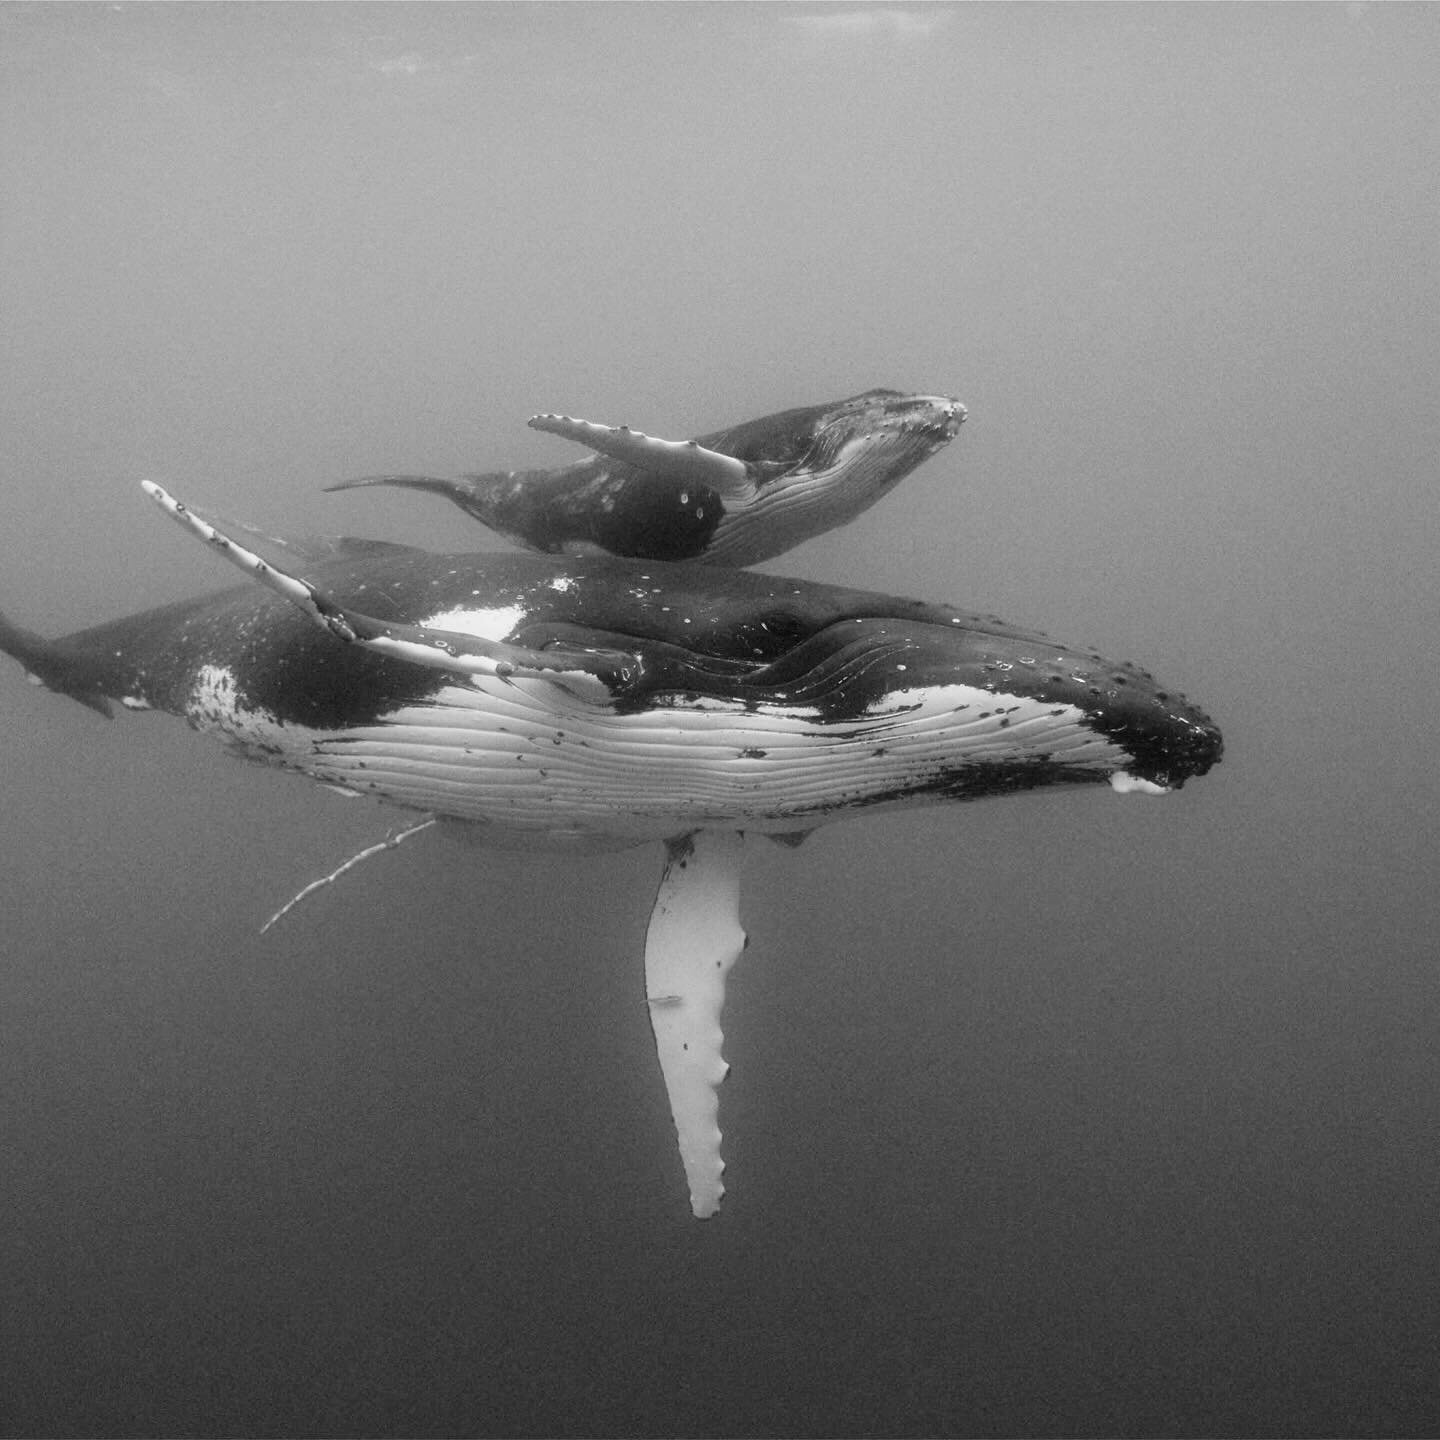 Time stands still when a you&rsquo;re face to face with a Humpback whale and its calf.

#ThrowbackPic to this life-altering moment almost ten years ago. 🐋  When it&rsquo;s your first time directing underwater, where do you go from here? (Well, you l